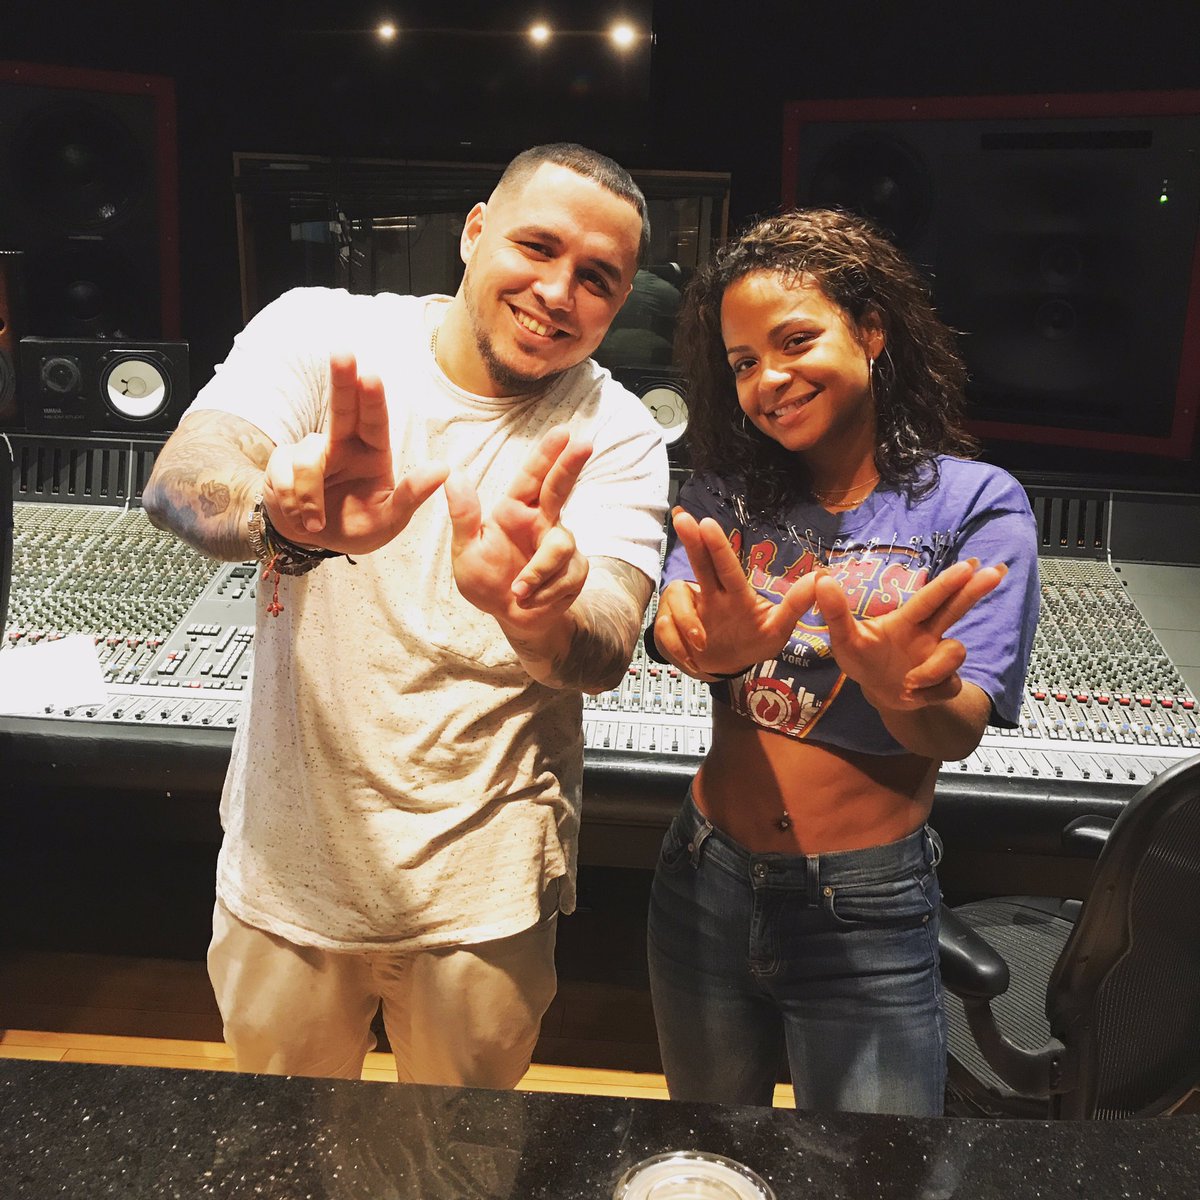 RT @iamchino__: Working with the most winning @ChristinaMilian thank you new music coming soon ???????????????? https://t.co/IwUnMmuVAm